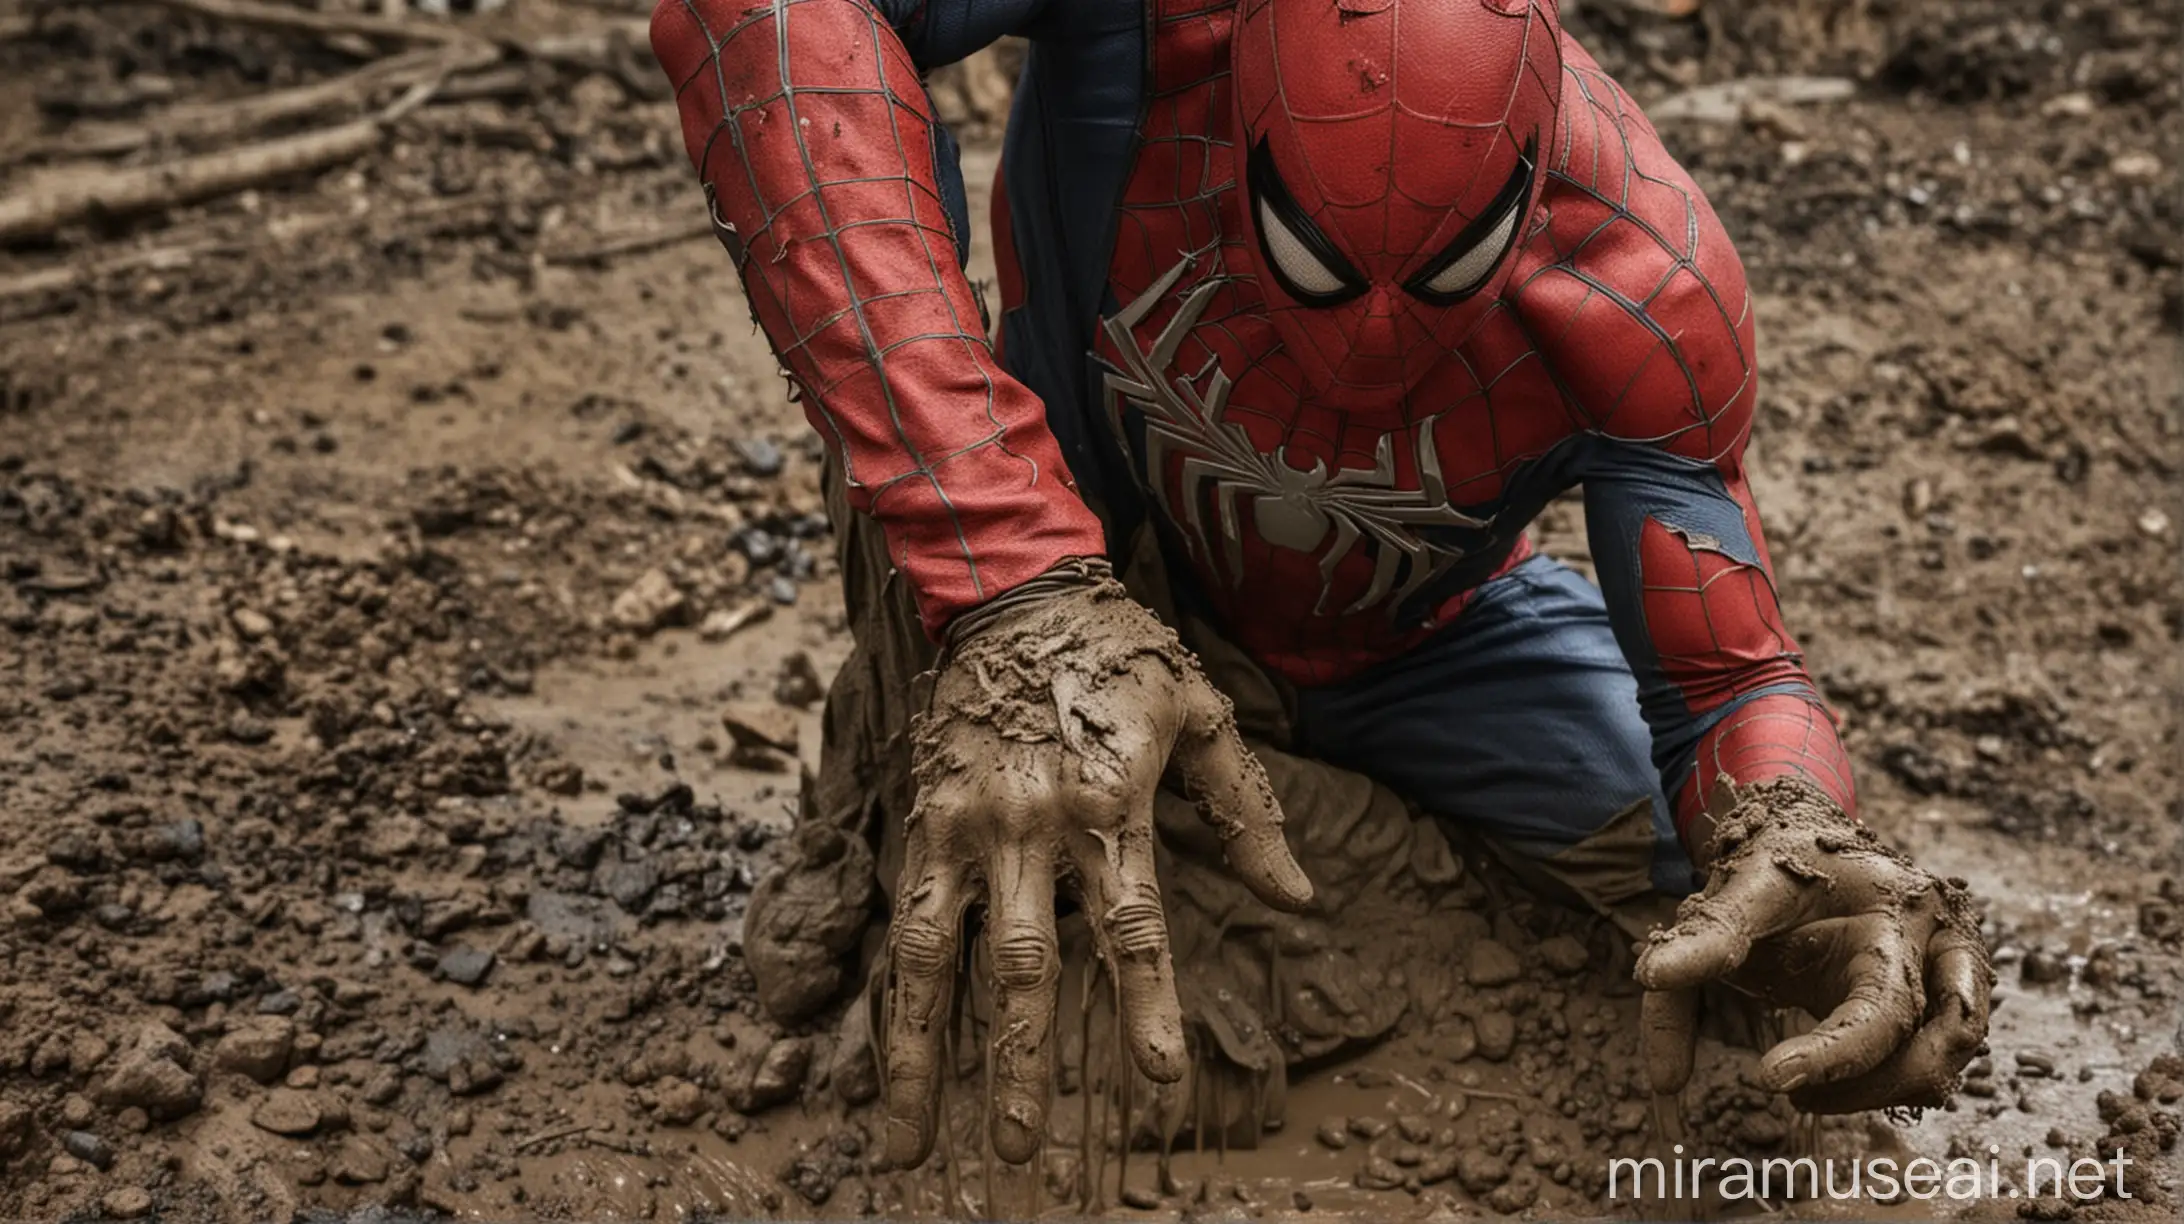 SpiderMan Costume Covered in Mud Being Dug Up